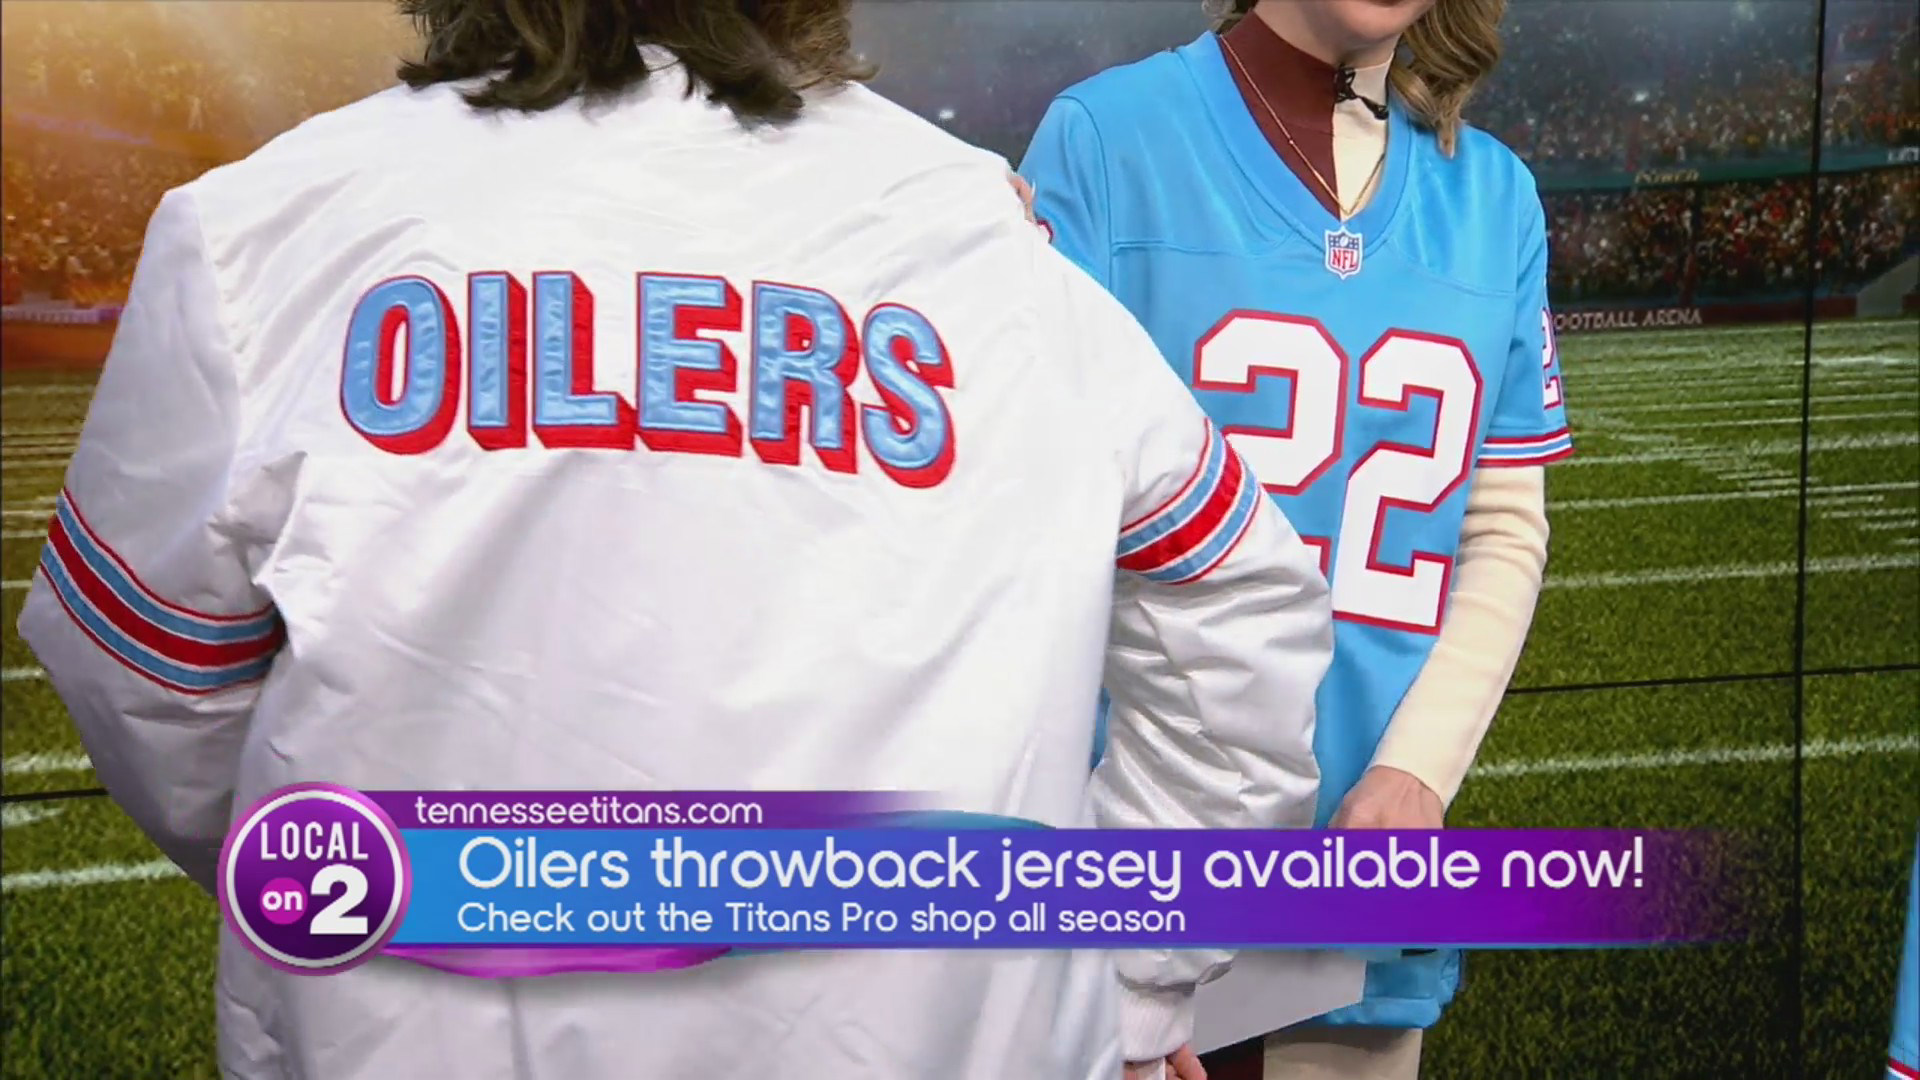 The Tennessee Titans throwback jerseys available now!